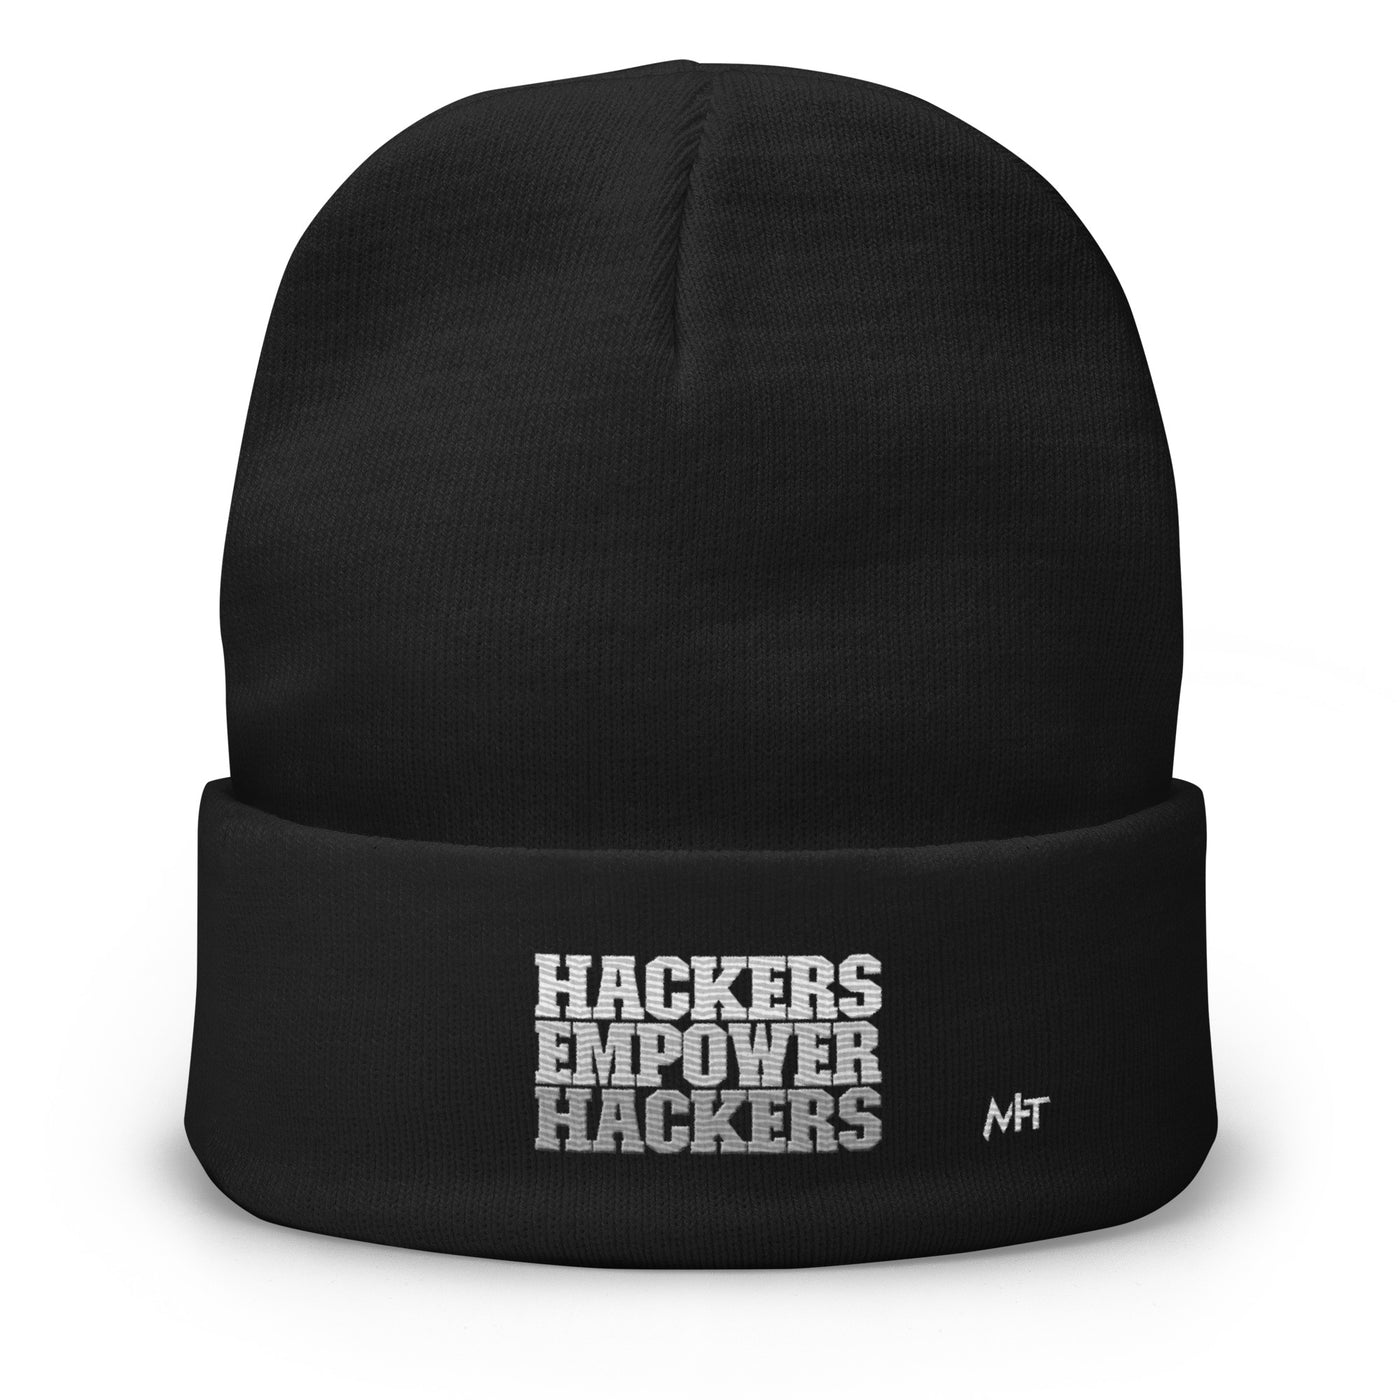 Hackers Empower Hackers V2 - Embroidered Beanie